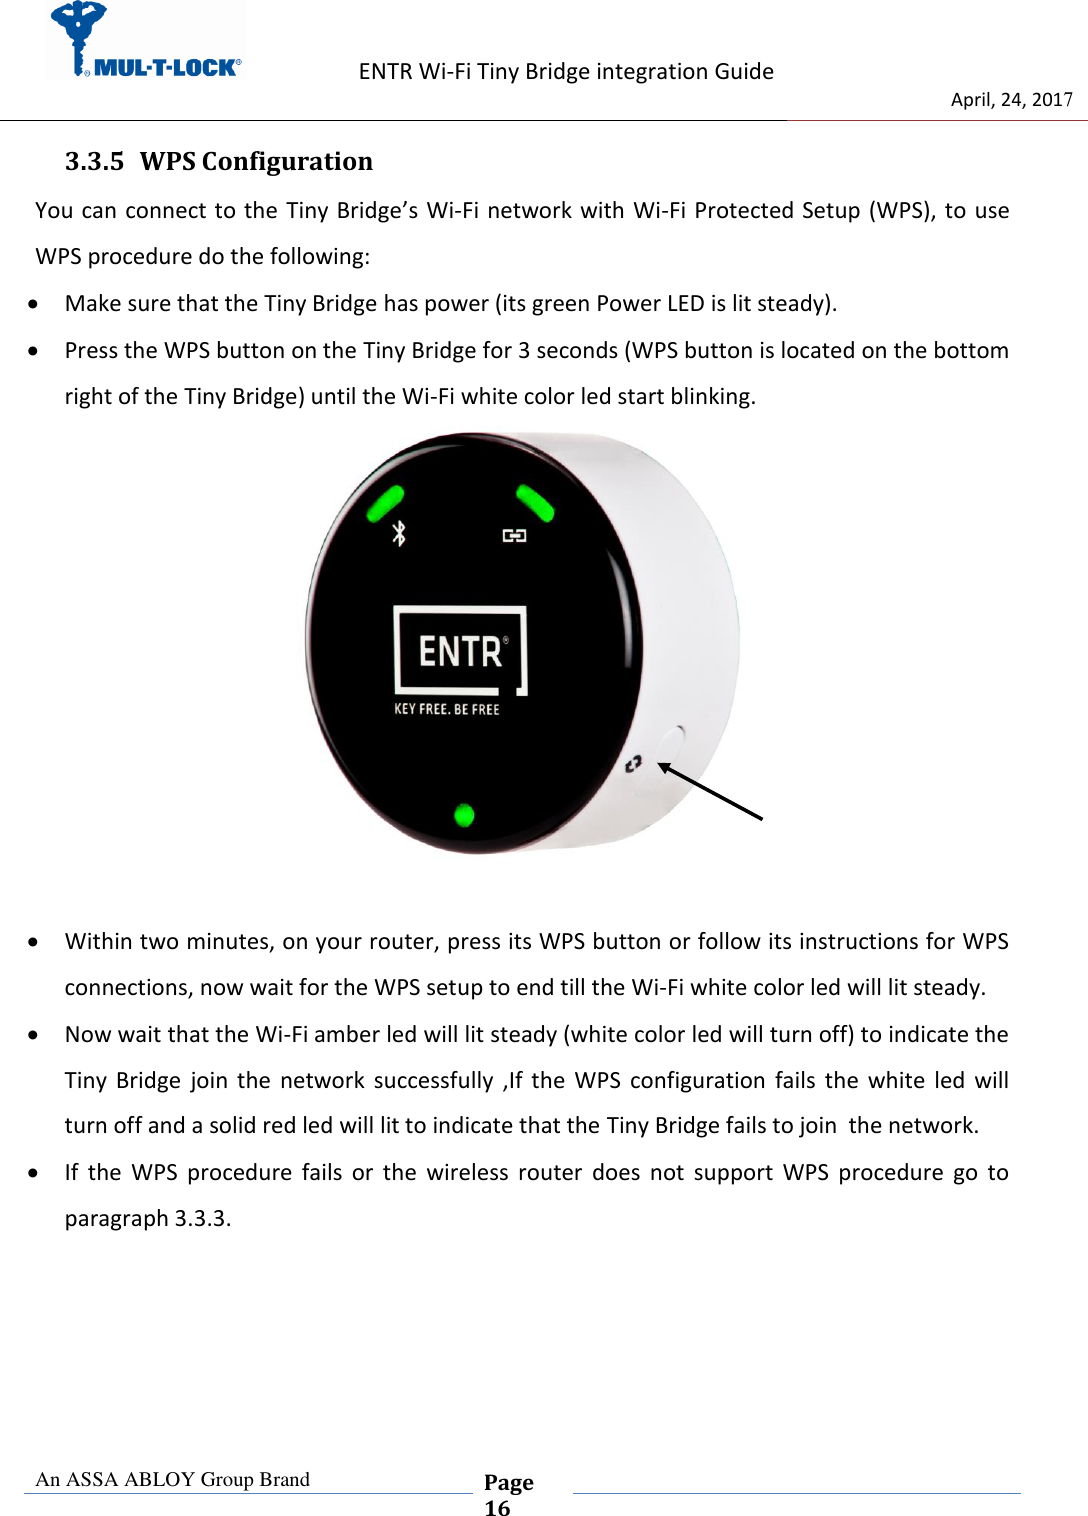                   ENTR Wi-Fi Tiny Bridge integration Guide     de                                 April, 24, 2017  An ASSA ABLOY Group Brand  Page 16    3.3.5 WPS Configuration   You can connect to the Tiny Bridge’s Wi-Fi network with Wi-Fi Protected Setup (WPS), to use WPS procedure do the following:   Make sure that the Tiny Bridge has power (its green Power LED is lit steady).   Press the WPS button on the Tiny Bridge for 3 seconds (WPS button is located on the bottom right of the Tiny Bridge) until the Wi-Fi white color led start blinking.    Within two minutes, on your router, press its WPS button or follow its instructions for WPS connections, now wait for the WPS setup to end till the Wi-Fi white color led will lit steady.  Now wait that the Wi-Fi amber led will lit steady (white color led will turn off) to indicate the Tiny  Bridge  join  the  network  successfully  ,If  the  WPS  configuration  fails  the  white  led  will turn off and a solid red led will lit to indicate that the Tiny Bridge fails to join  the network.  If  the  WPS  procedure  fails  or  the  wireless  router  does  not  support  WPS  procedure  go  to paragraph 3.3.3.     